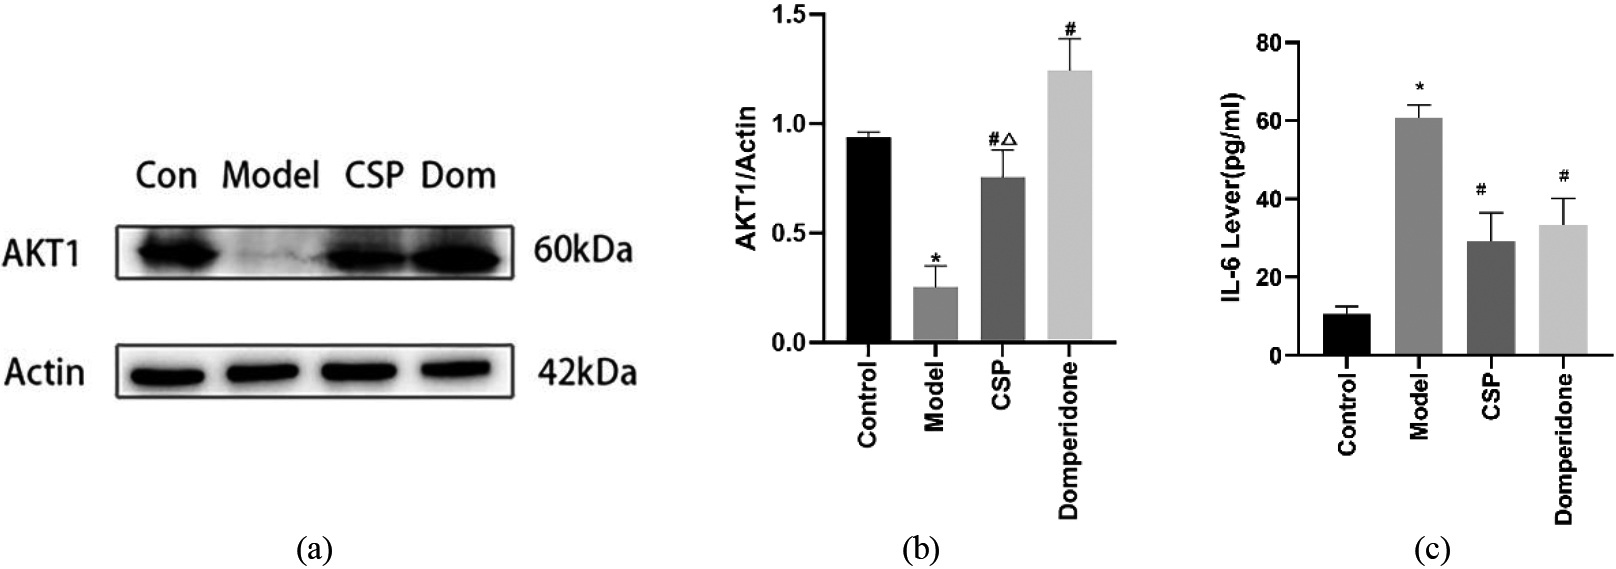 CSP upregulated the expression of AKT1 and reduced the level of IL-6. (a–b) Representative western blotting pictures and quantitative analysis of AKT1, n= 6. (c) Serum IL-6 level, n= 6. P*< 0.05 vs. control group, P#< 0.05 vs. model group, Δ⁢P< 0.05 vs. domperidone group.